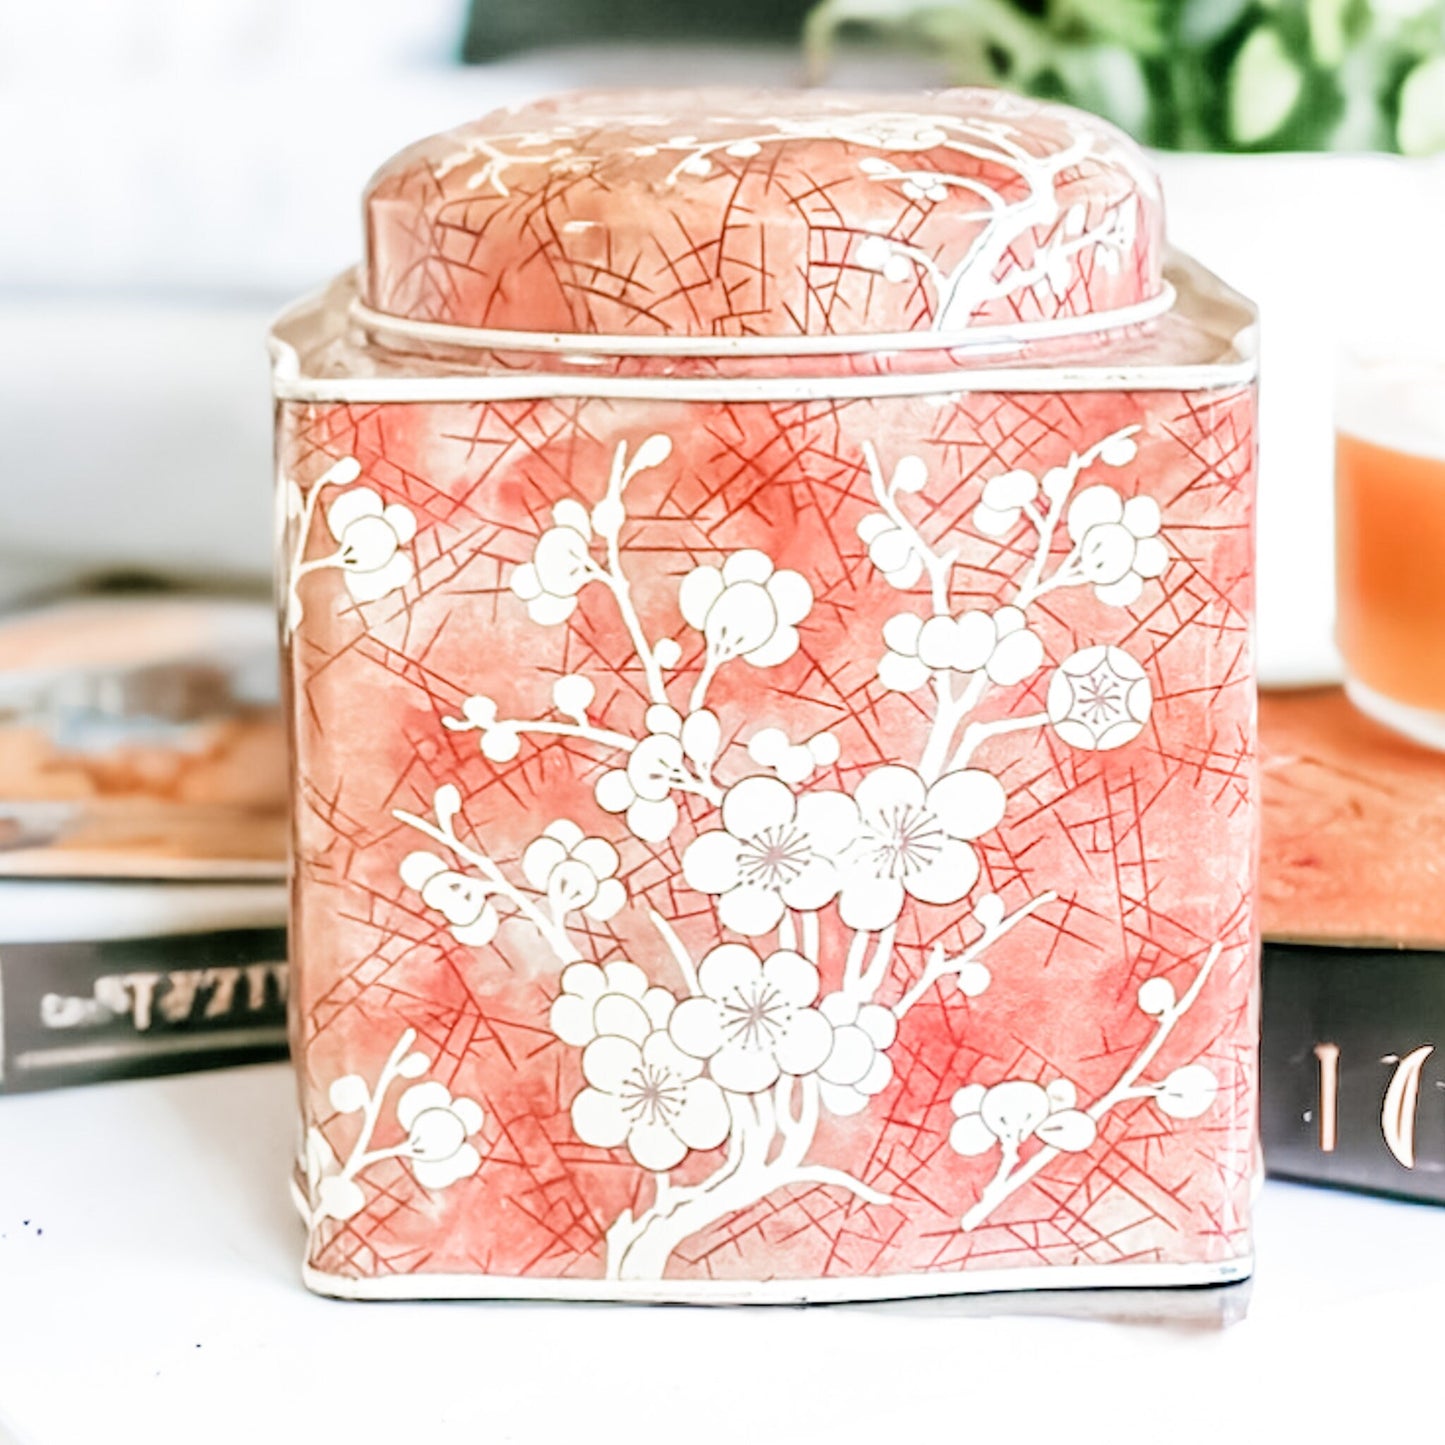 Soy Candle, Vintage Tins, Unique Gifts, Best Friend Gifts